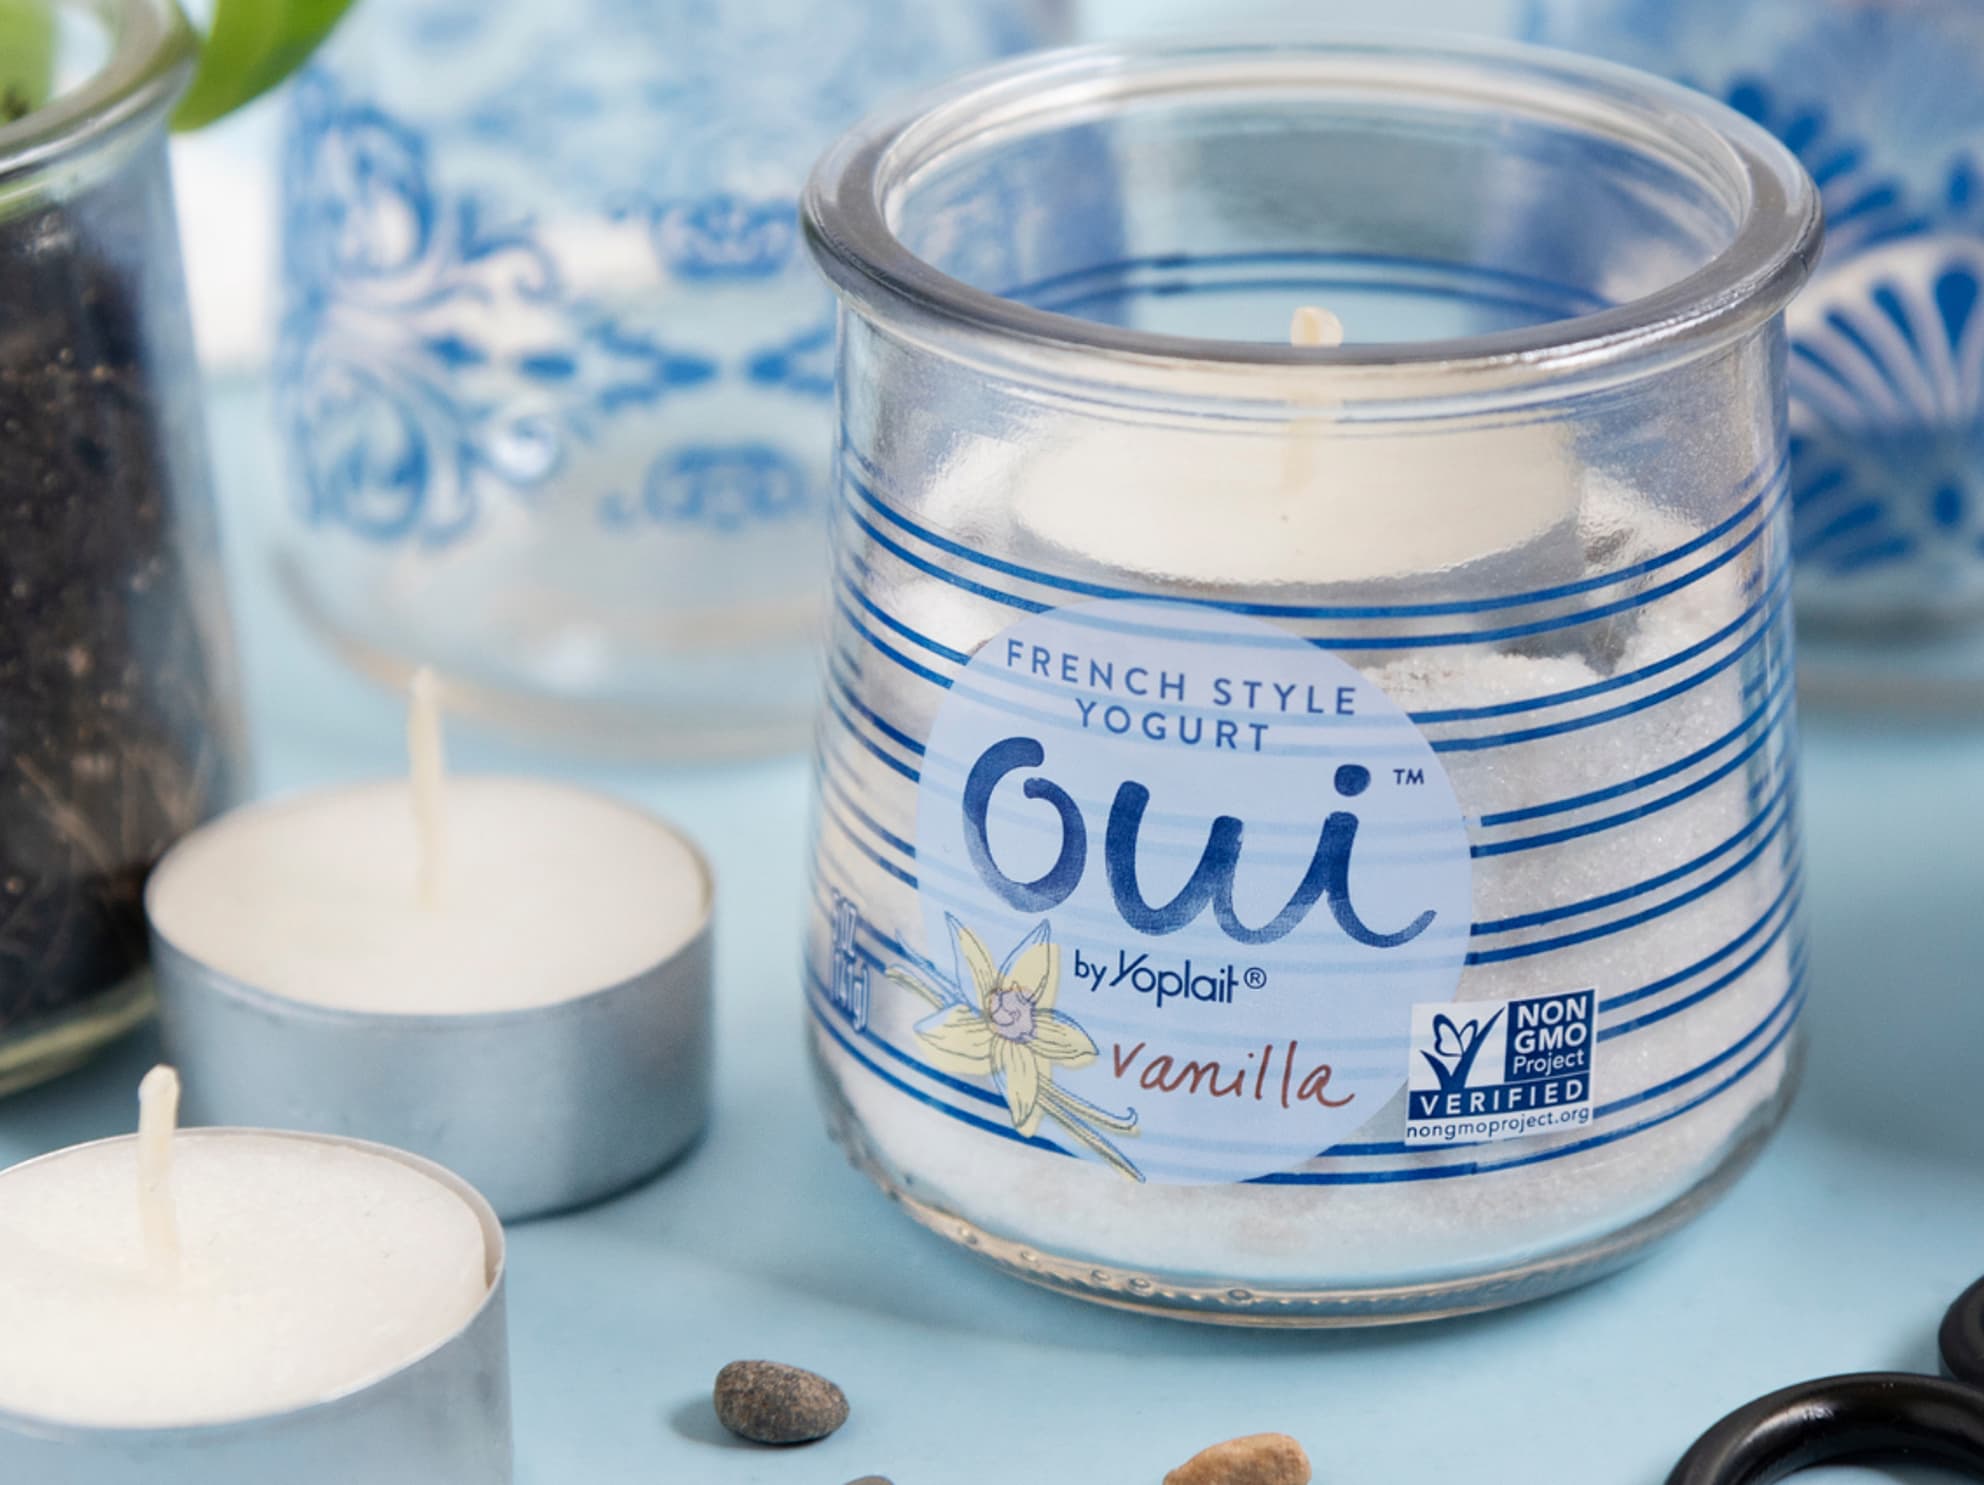 Oui by Yoplait launches heritage collection - General Mills